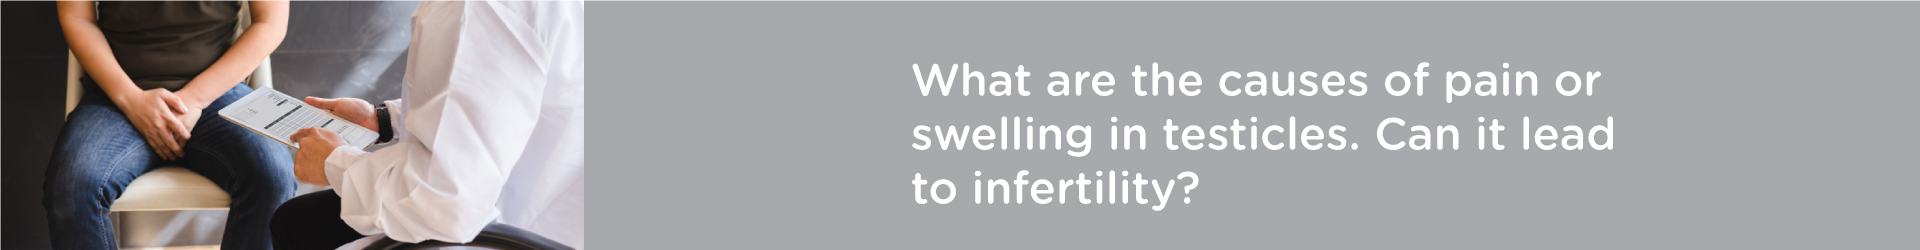 What are the Causes of Pain or Swelling in Testicles? Can It Lead to Infertility?